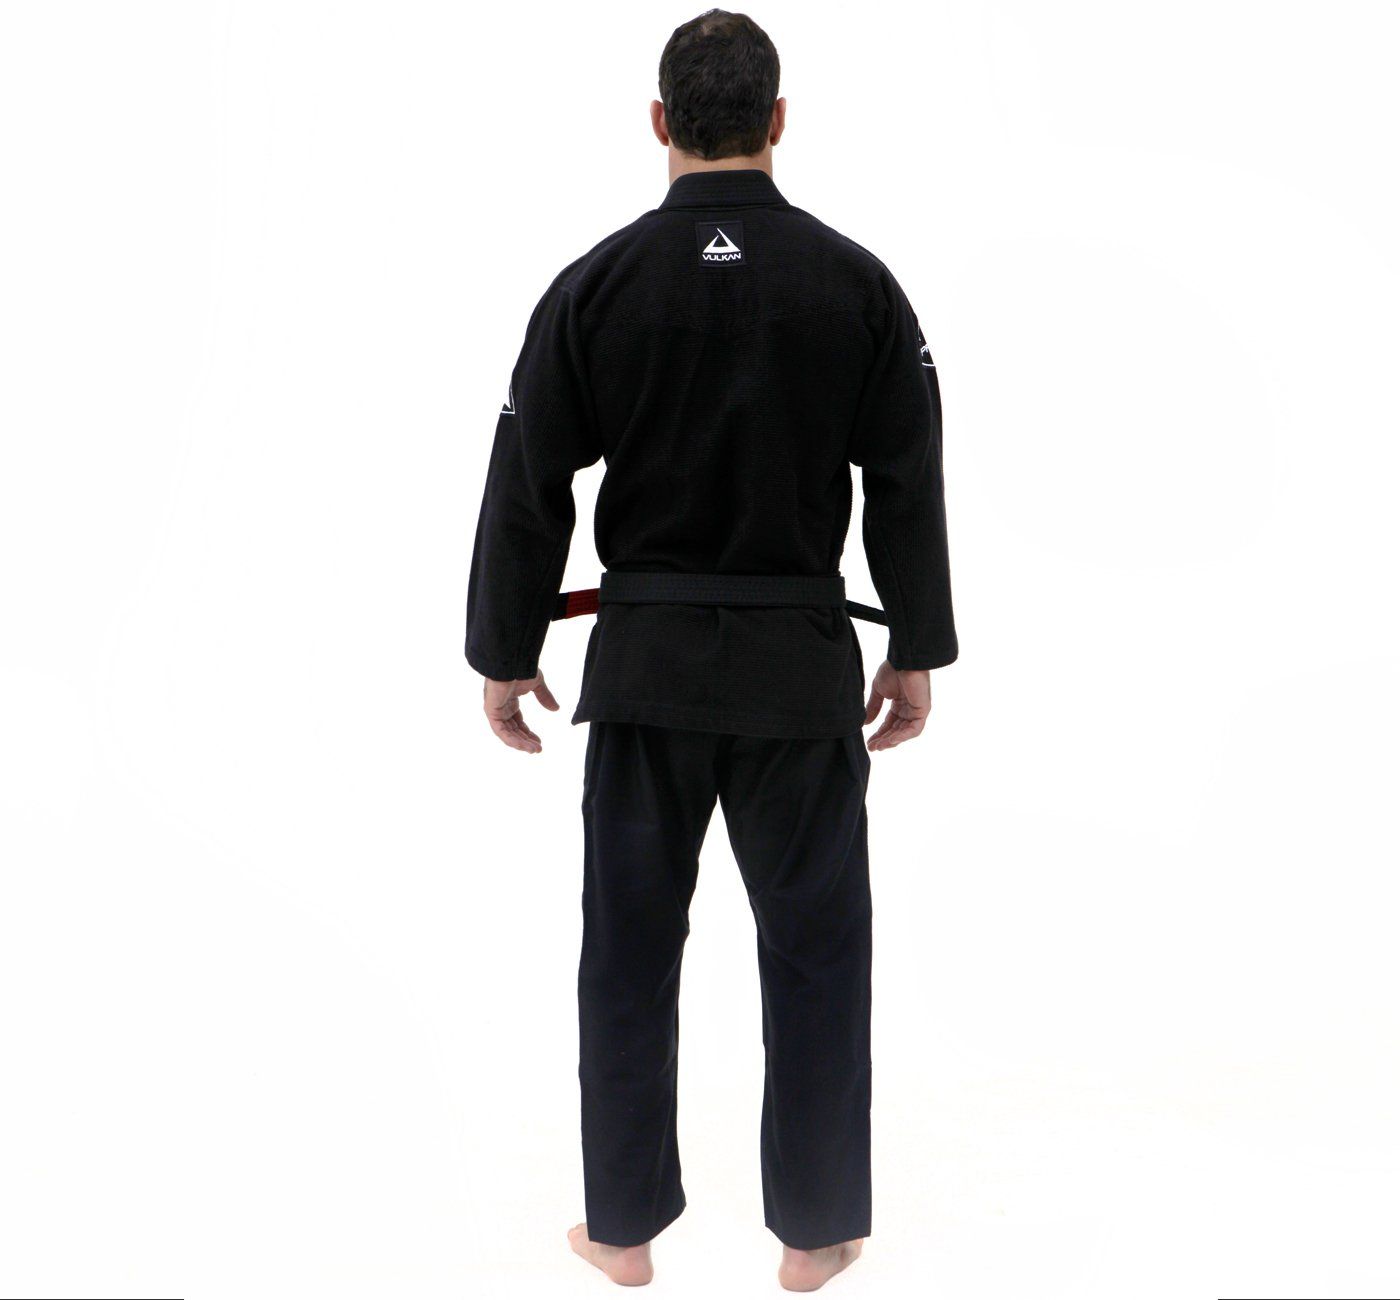 Why are Black BJJ Gi's So Popular? – FightstorePro